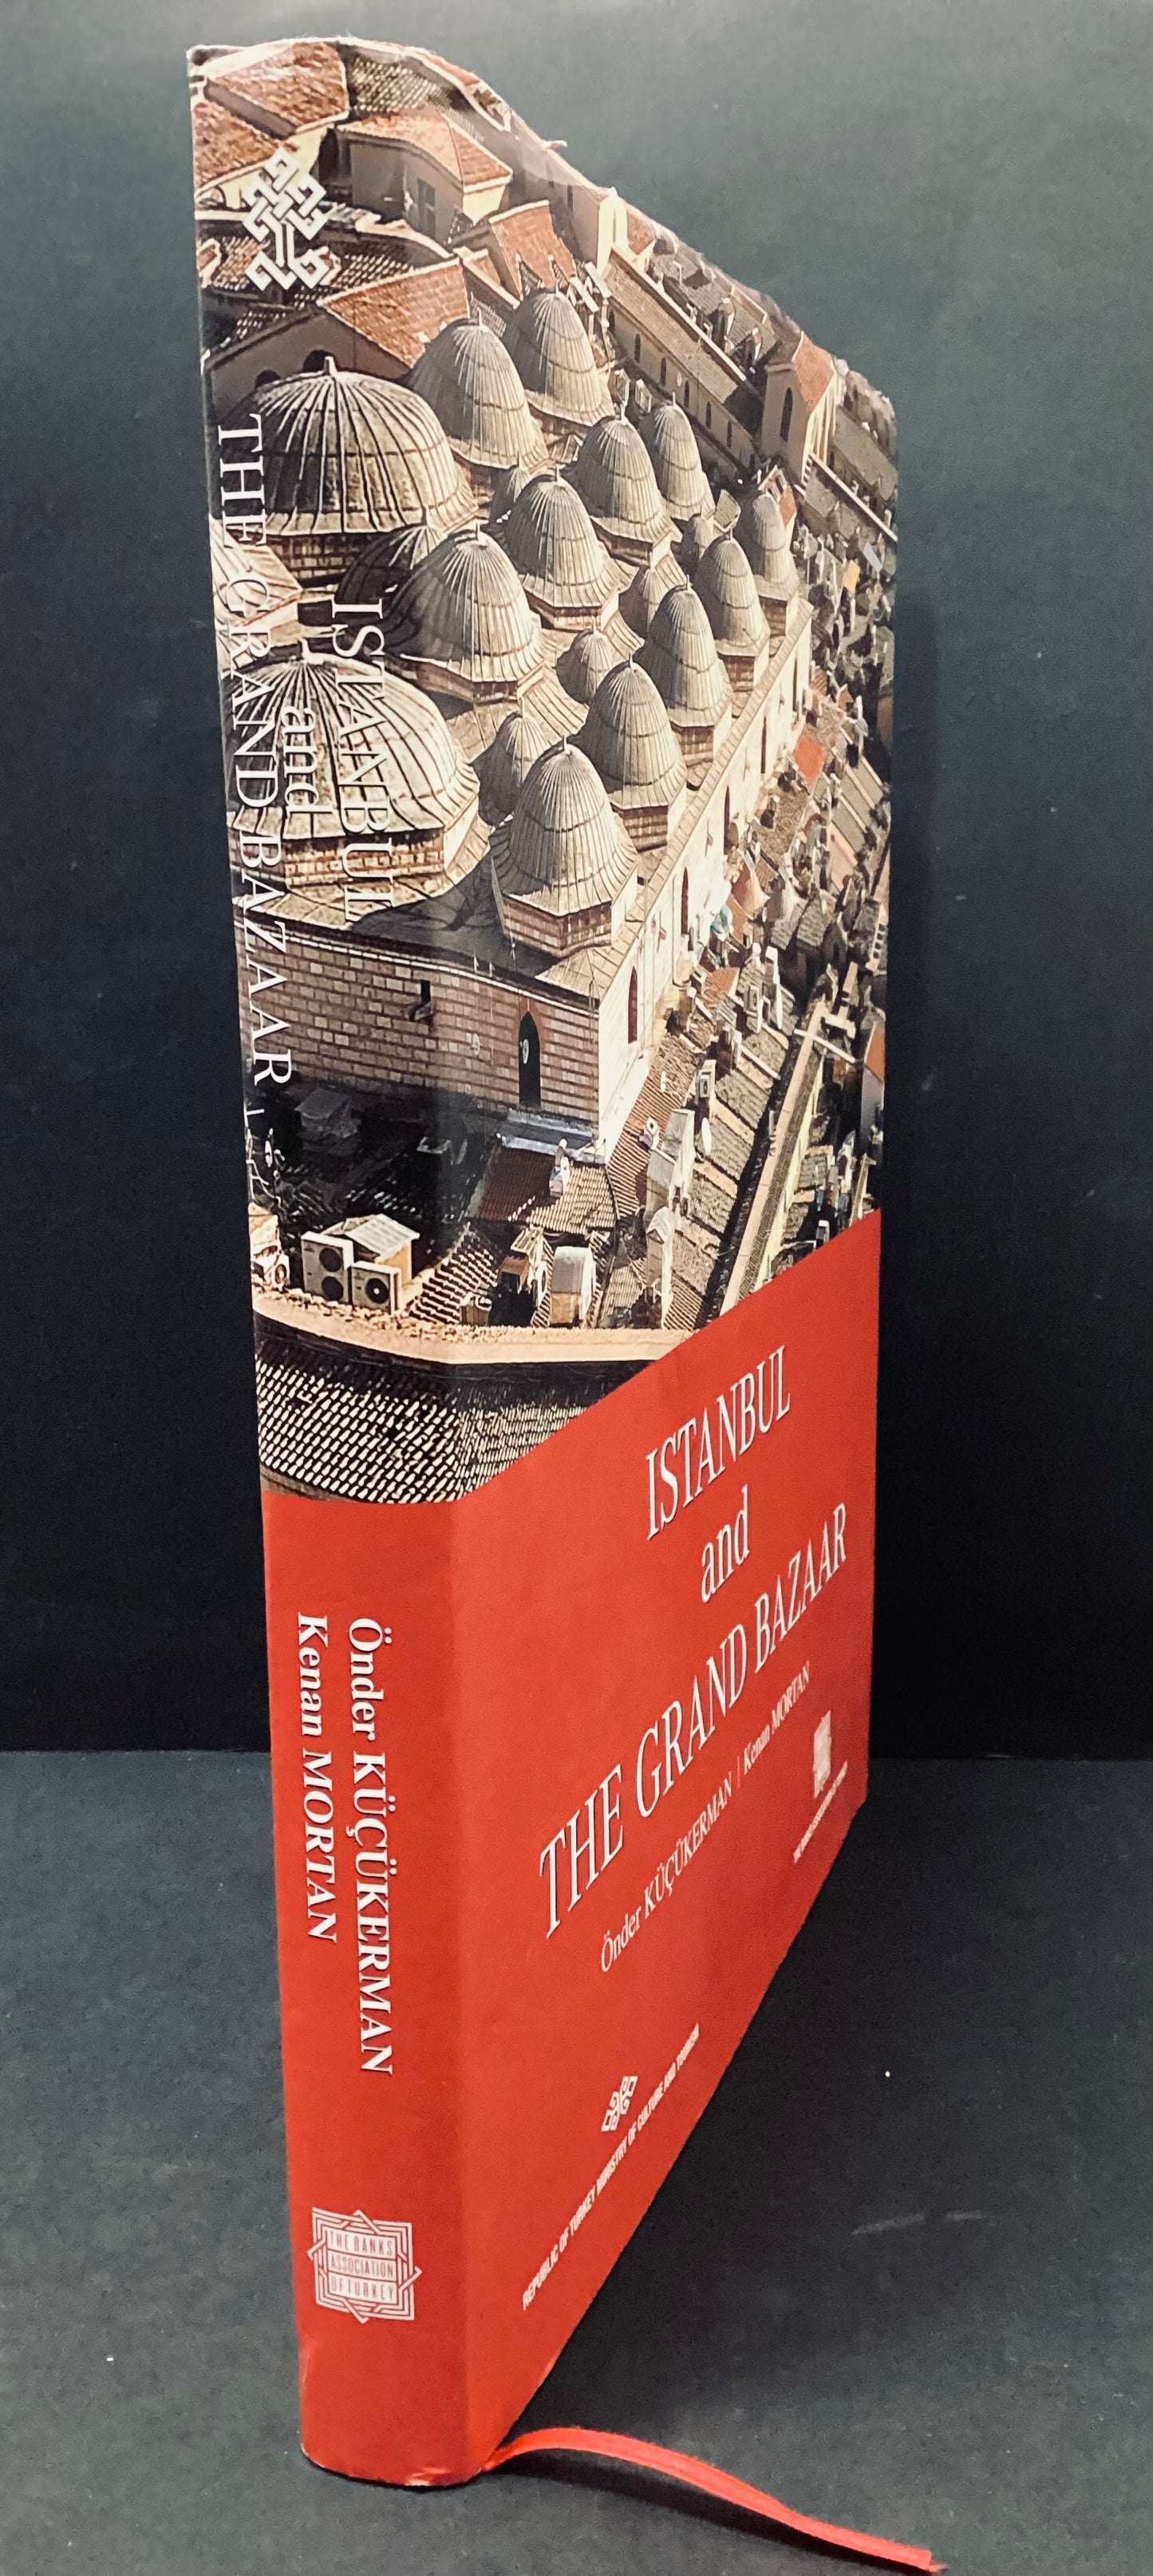 Istanbul and the Grand Bazaar by K. Mortan and O. Kucukerman, 2008